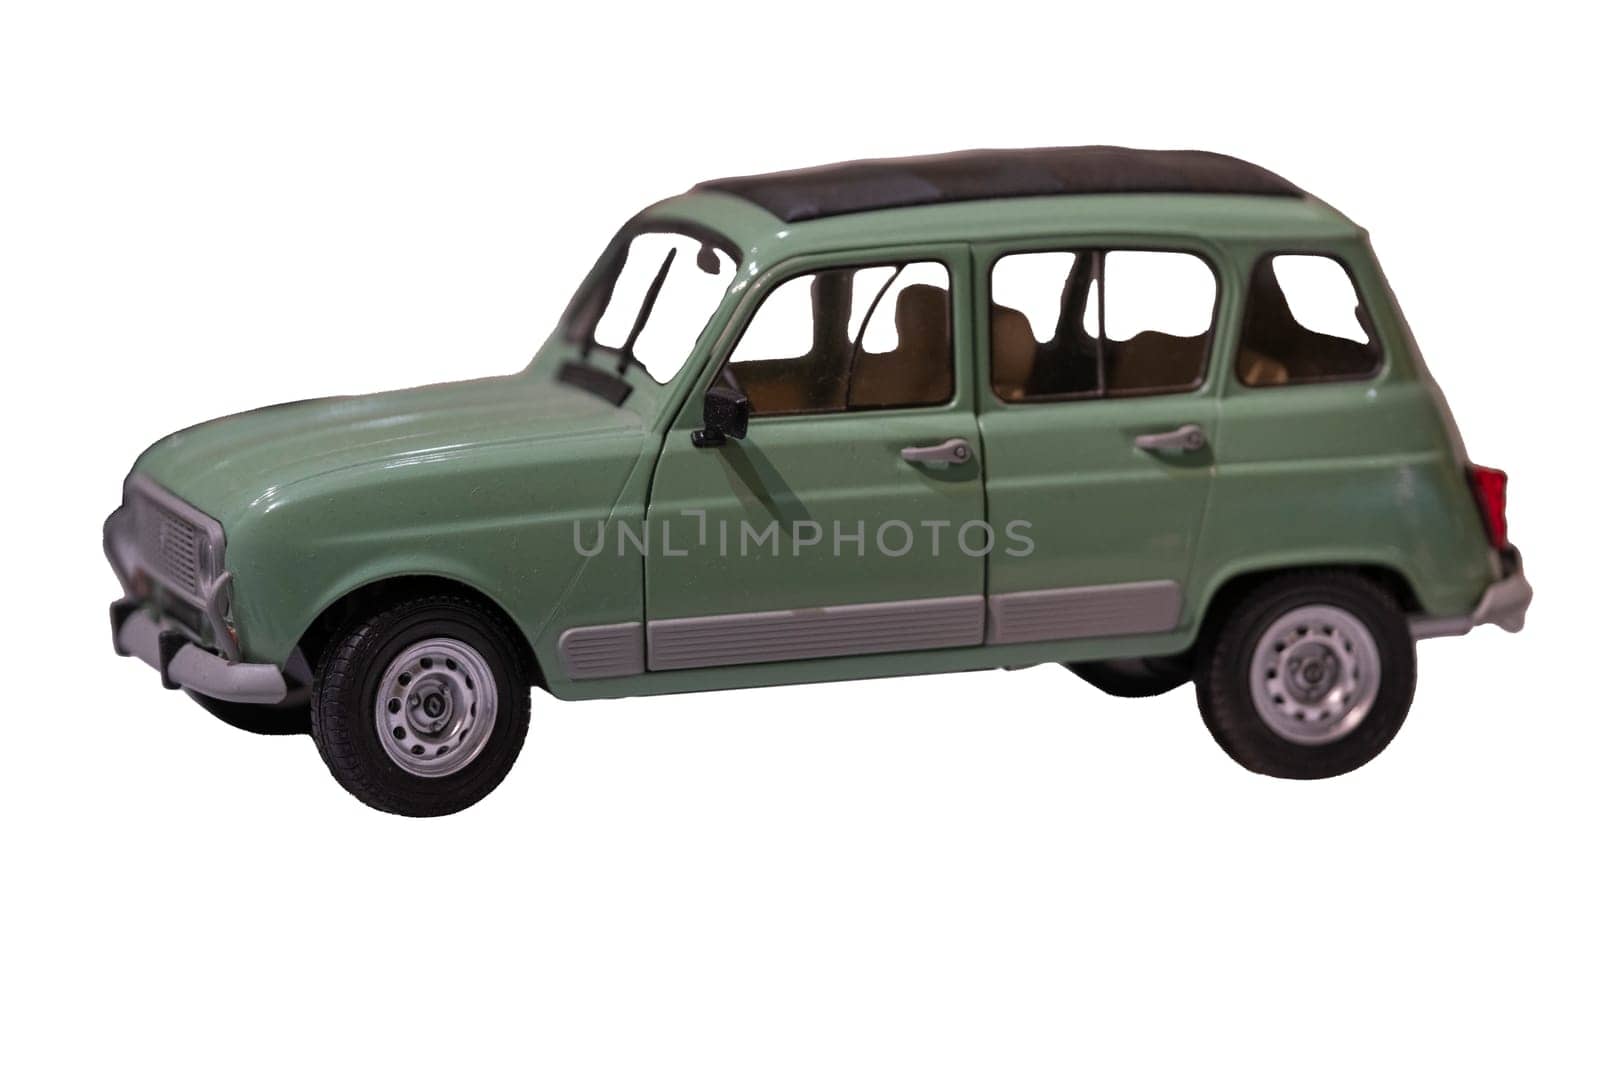 A scale model of a mint pastel green vintage car from 1950-60s. Car is a 4 door station wagon and has a roll off leather or canvas top. Isolated on white with clipping path. Focus on foreground